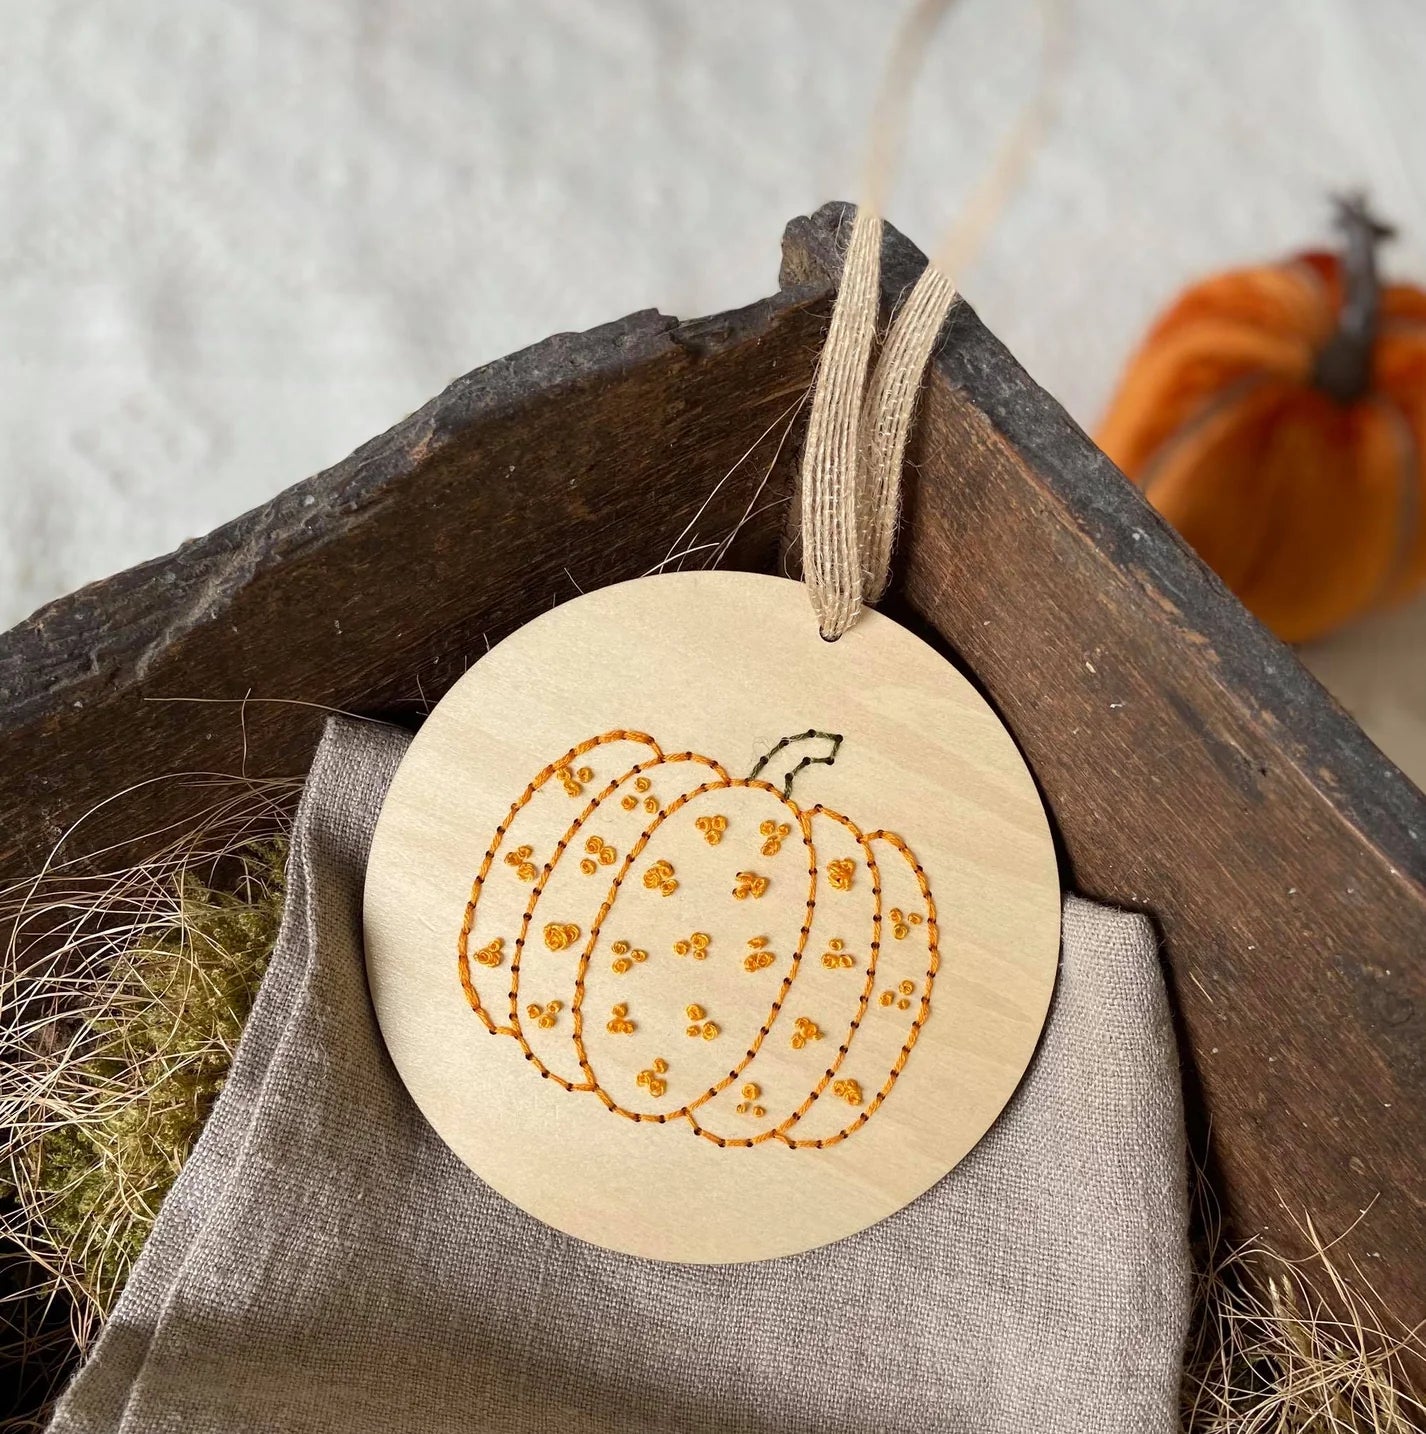 Wooden Embroidery Kits